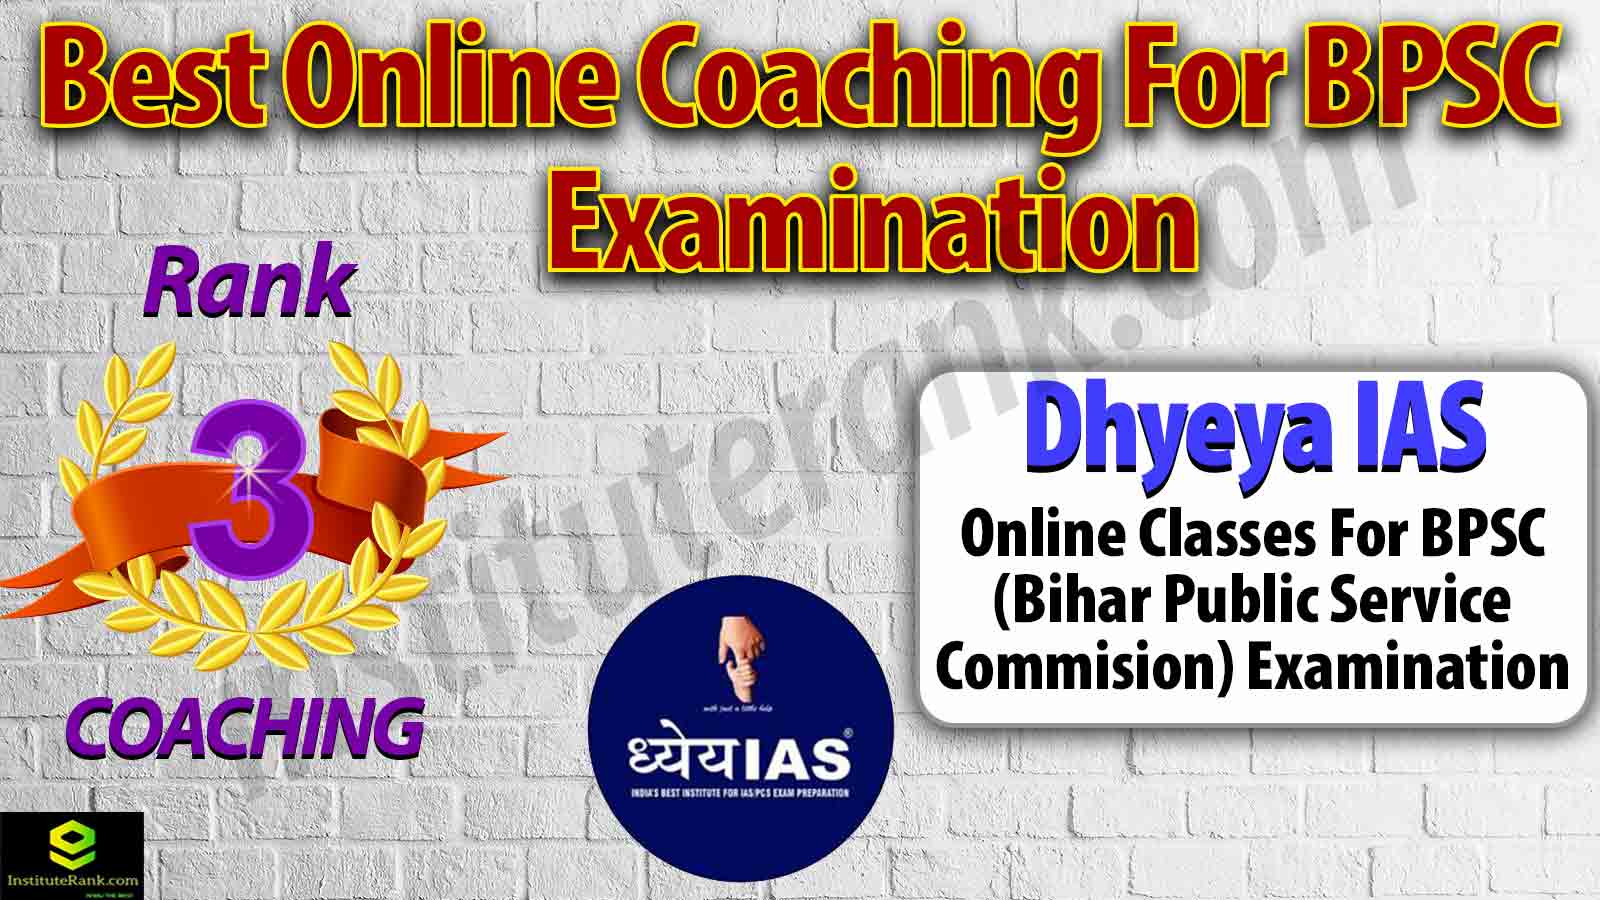 Top Online Coaching Preparation for BPSC Examination